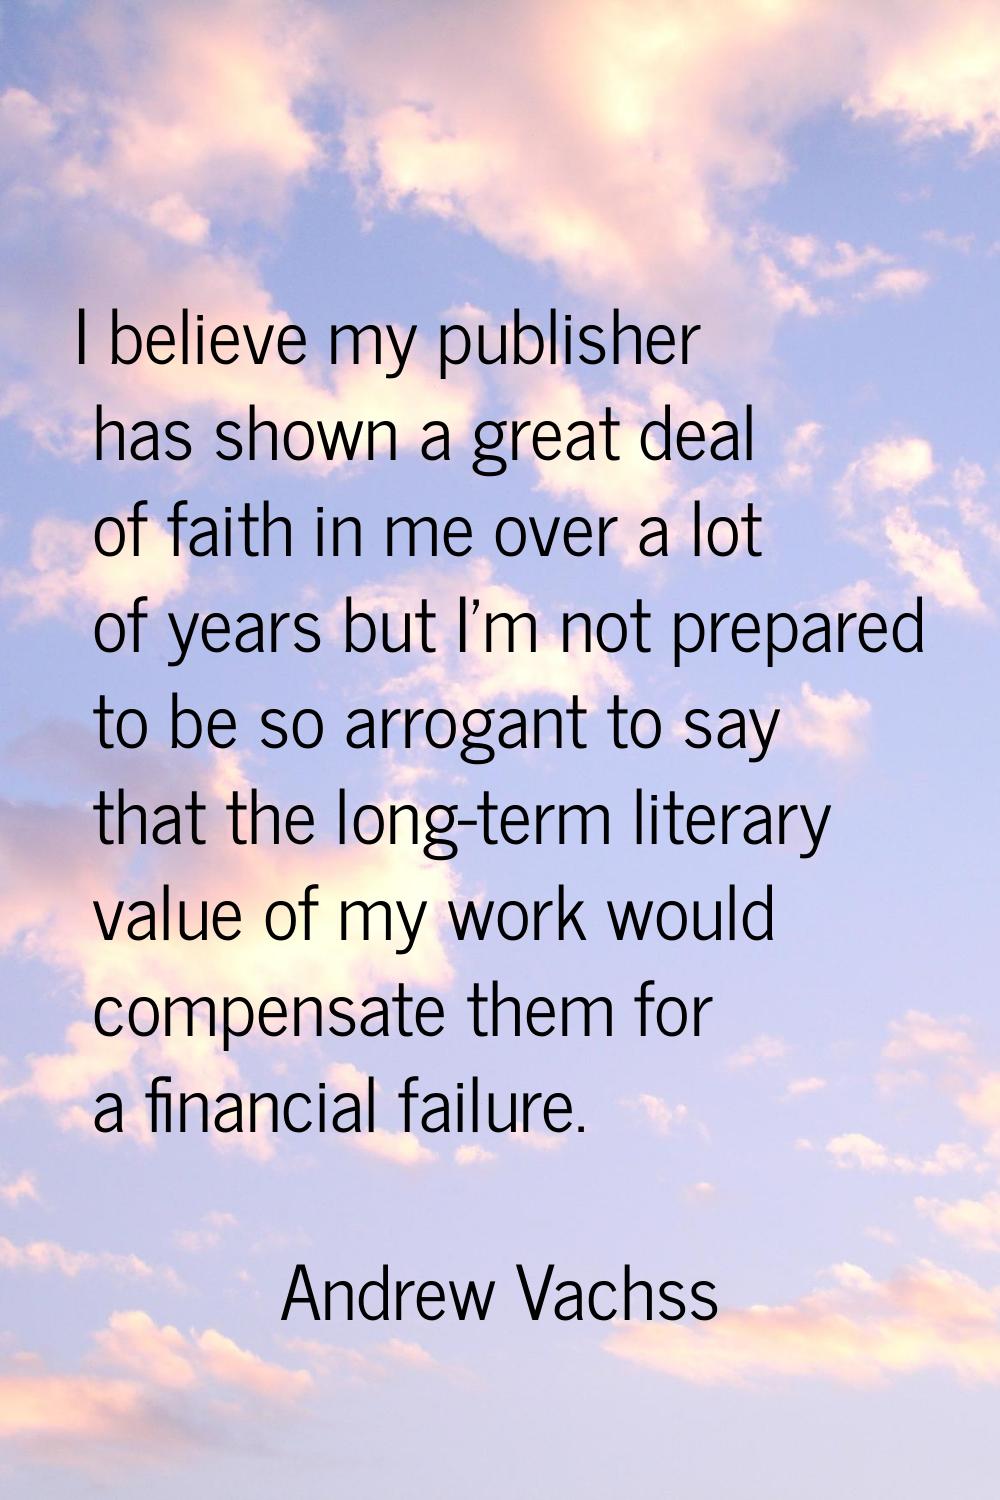 I believe my publisher has shown a great deal of faith in me over a lot of years but I'm not prepar